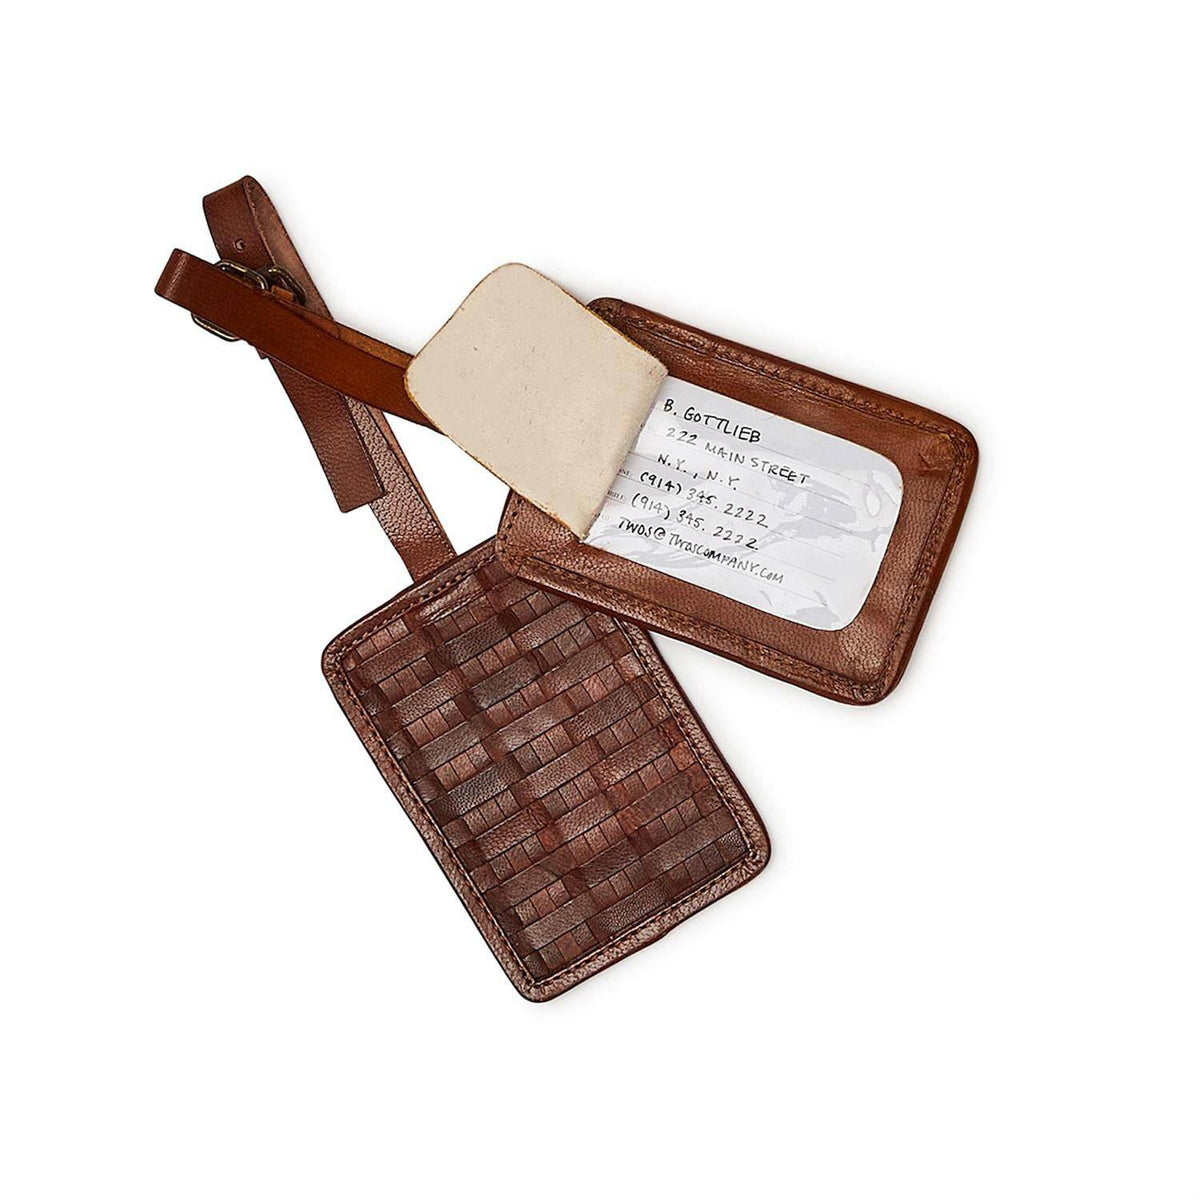 Woven Leather Luggage Tag - The Preppy Bunny